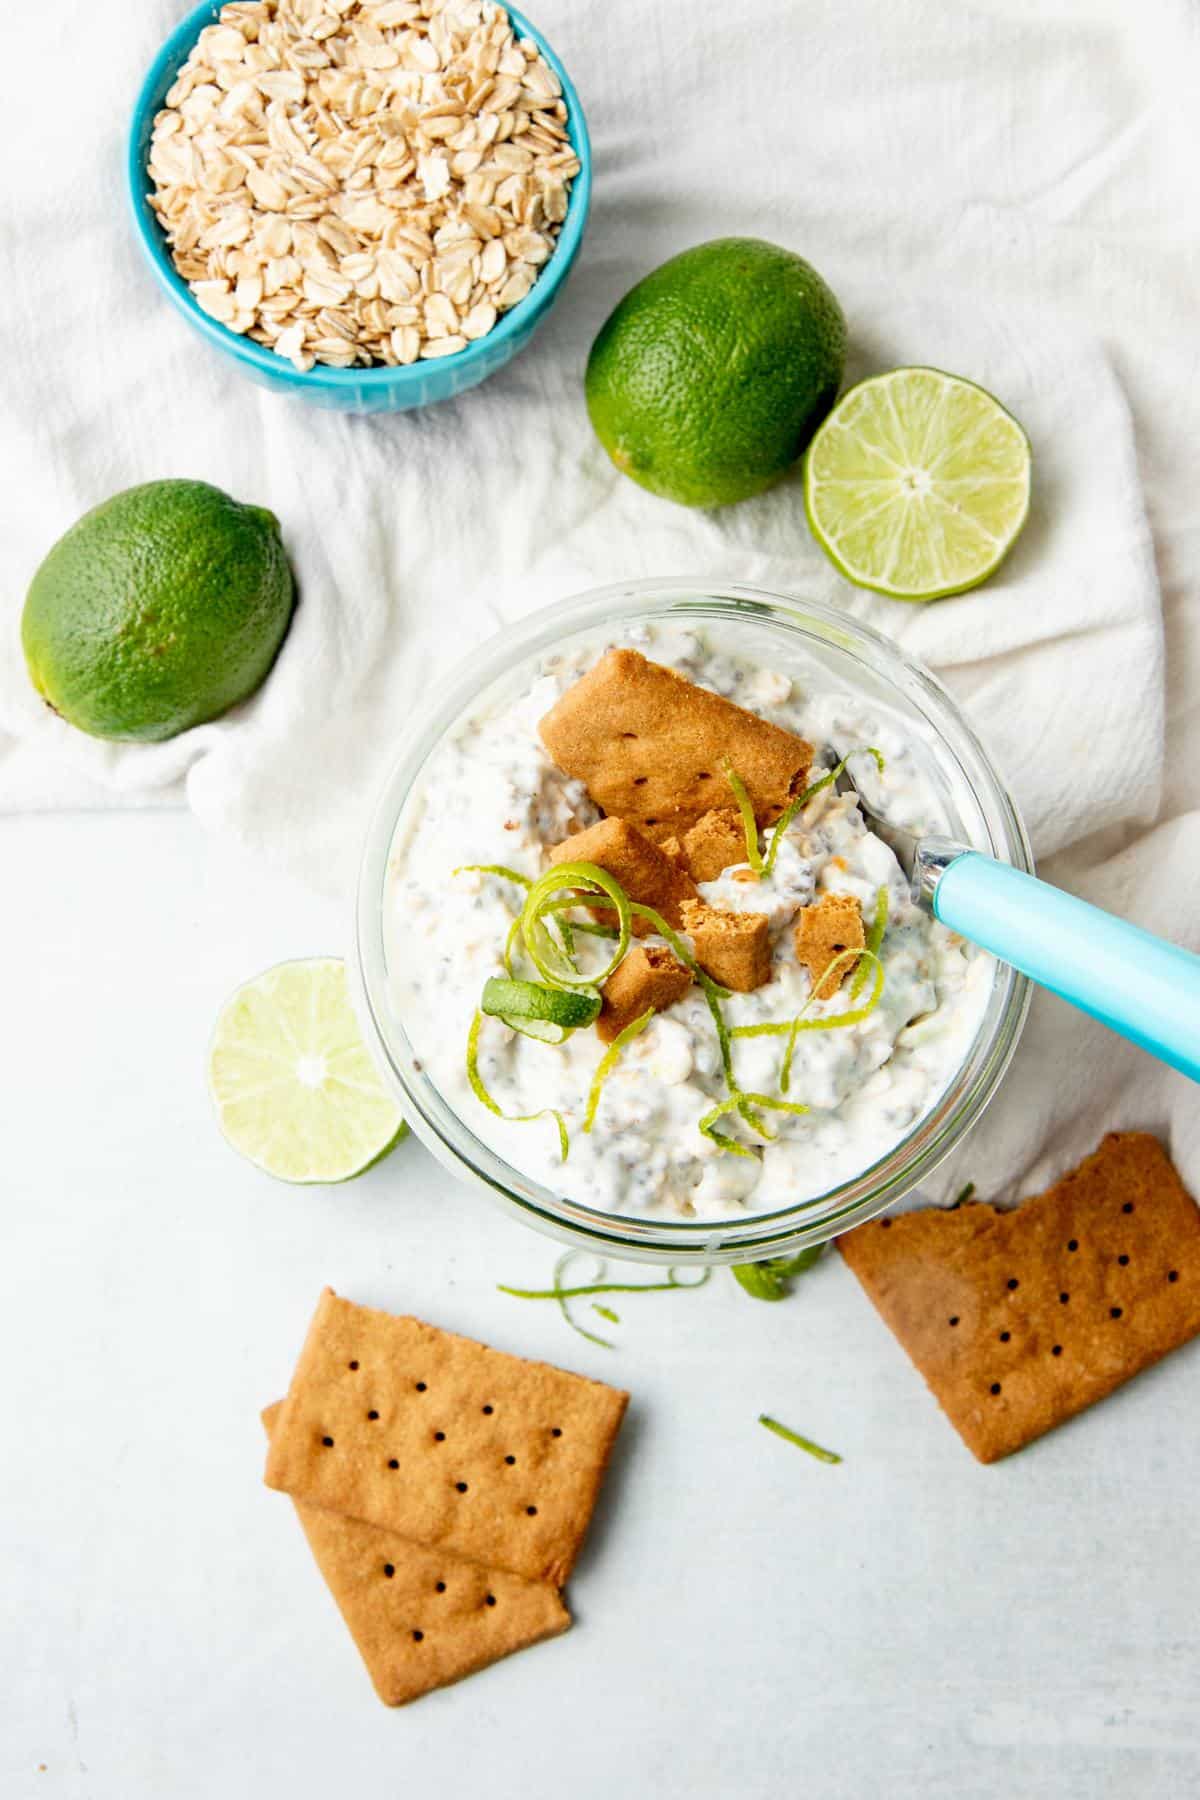 A spoon with a blue handle sits in a jar of overnight oats. Limes and graham crackers surround the jar.